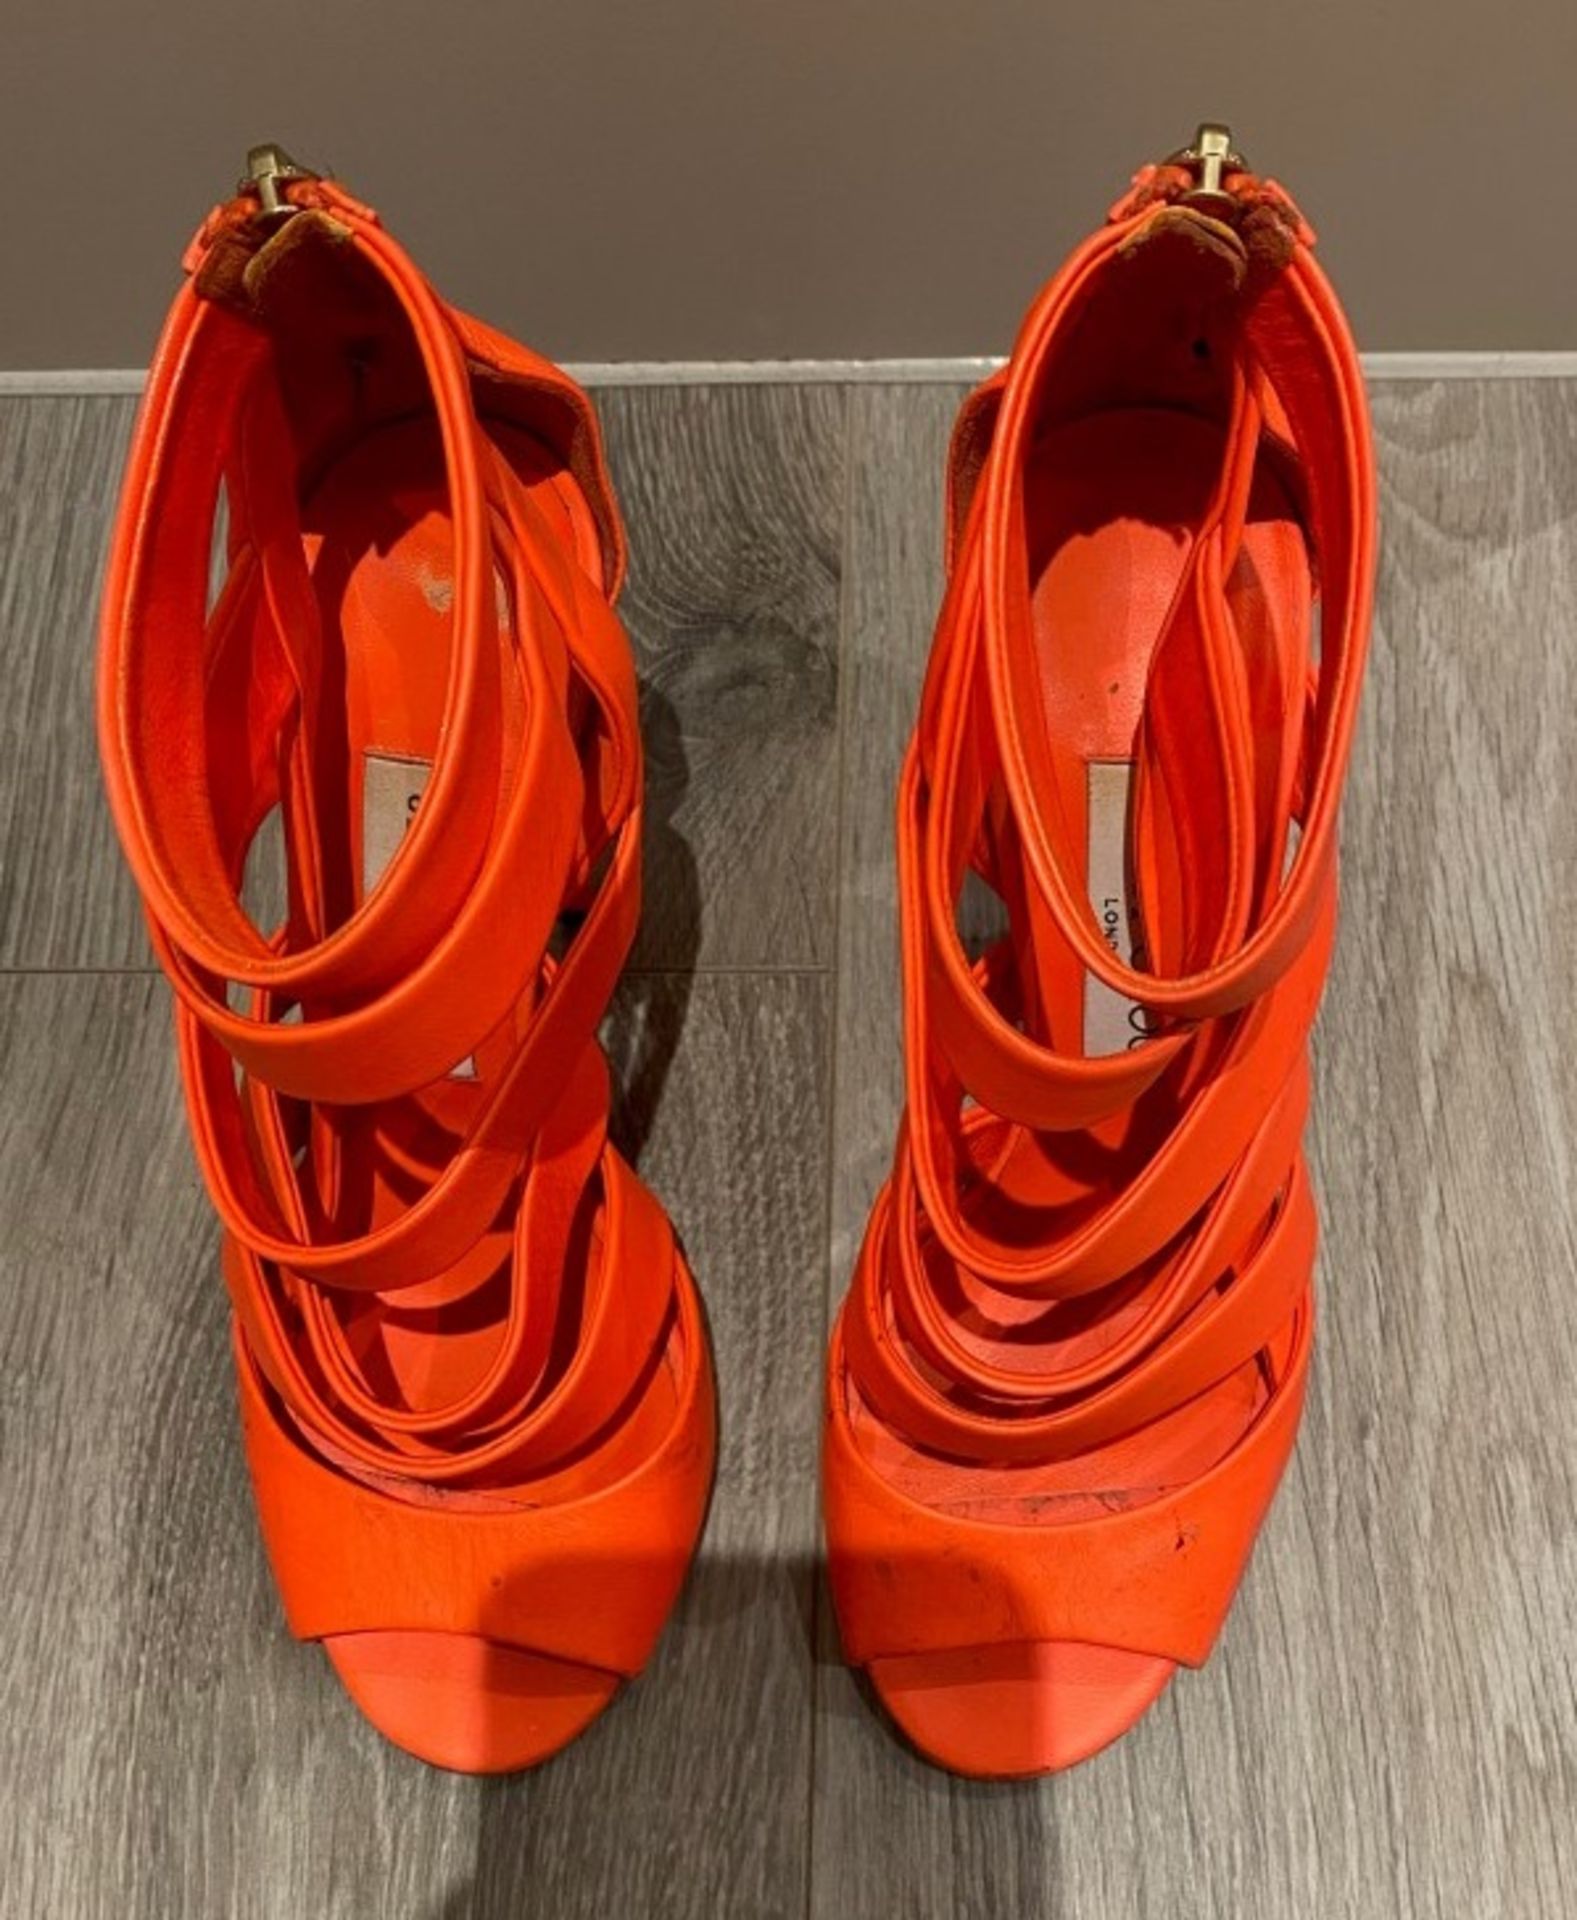 1 x Pair Of Genuine Jimmy Choo High Heel Shoes In Coral - Size: 36 - Preowned in Worn Condition - Re - Image 2 of 5